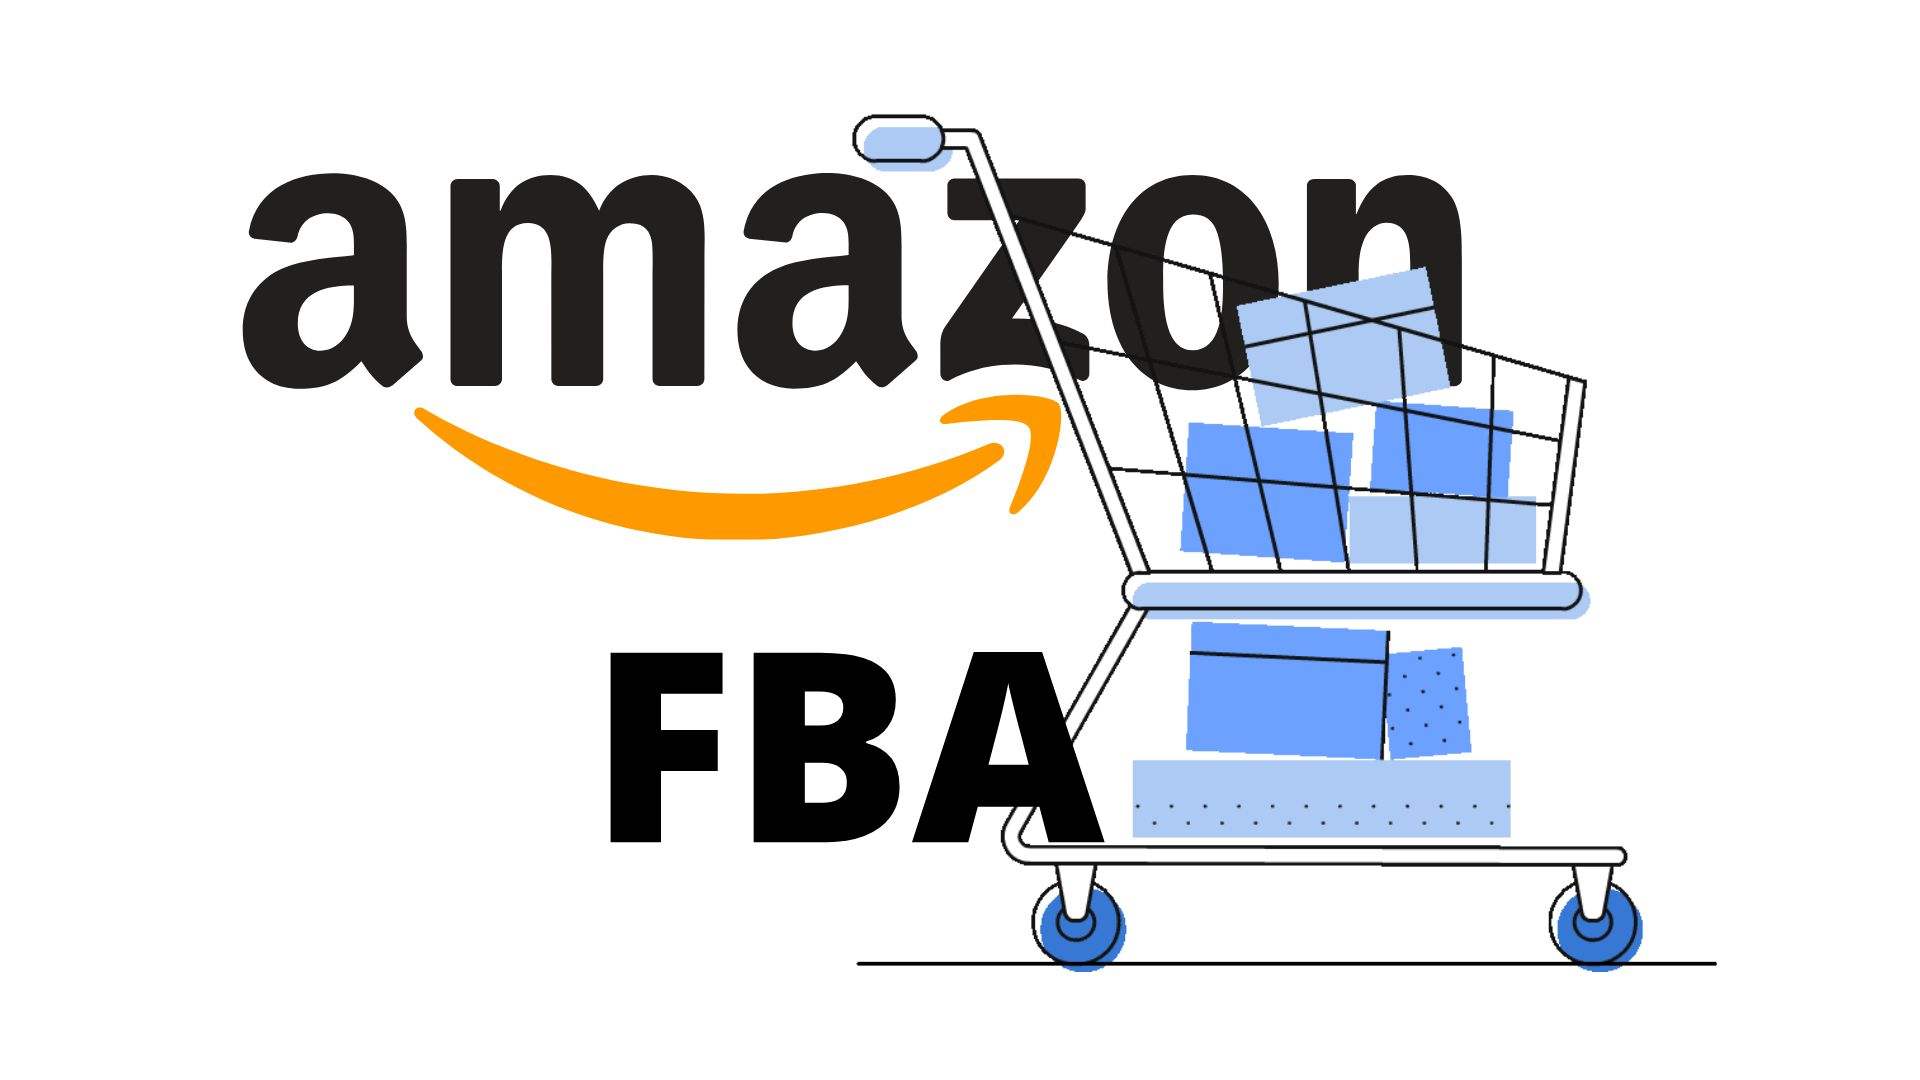 Analysis of advantages and disadvantages of three cross-border e-commerce overseas warehouses